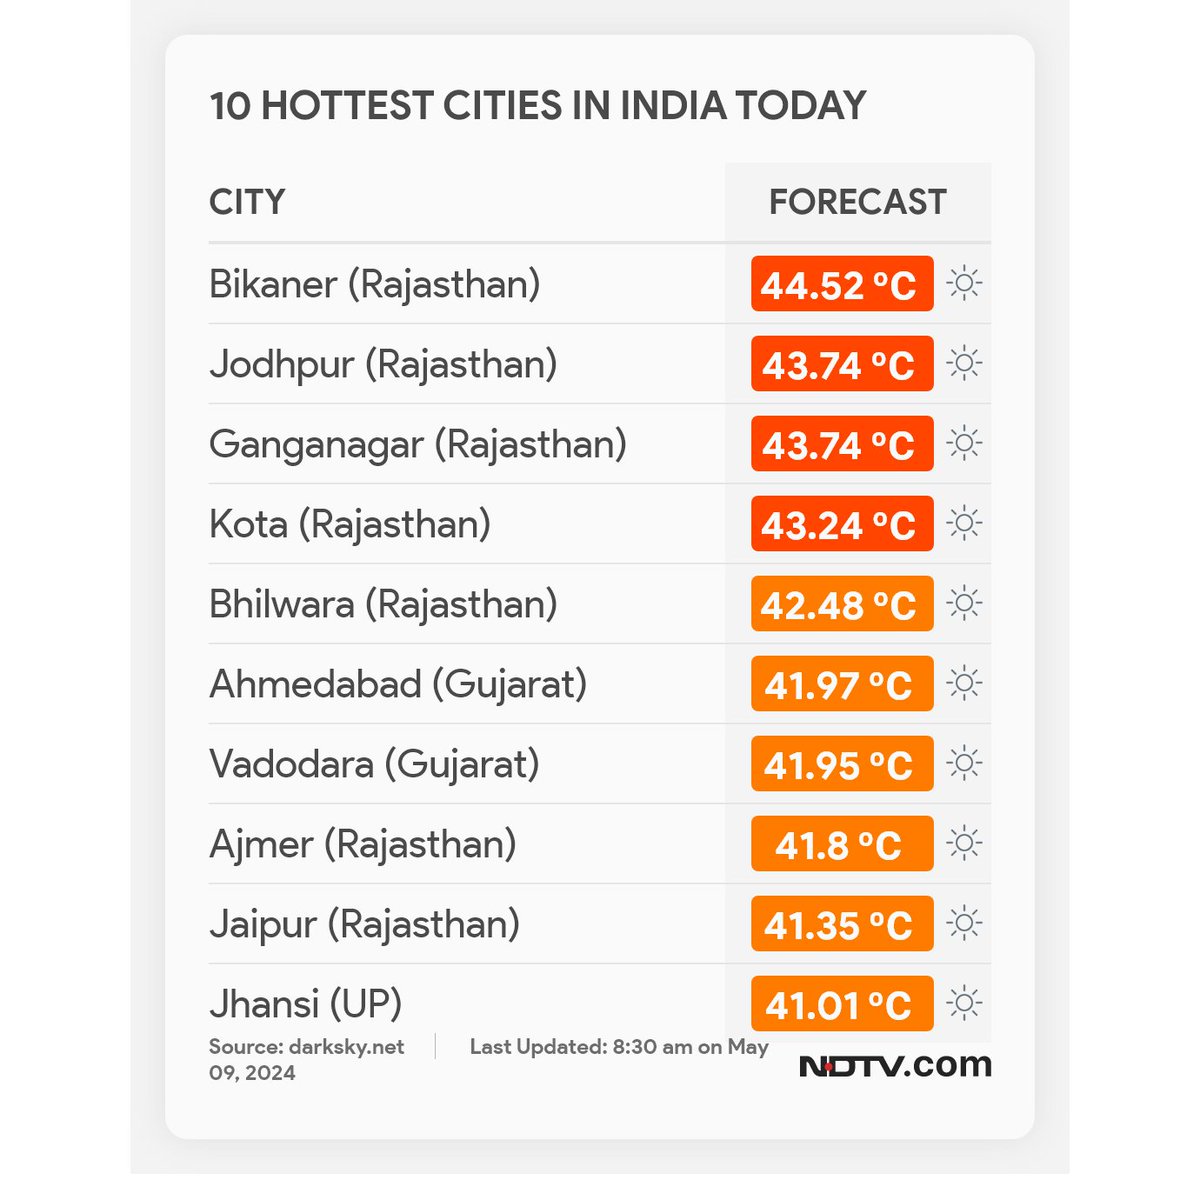 ☀️A look at India's 10 hottest cities at 8:30 am

#Heatwave #WeatherUpdate